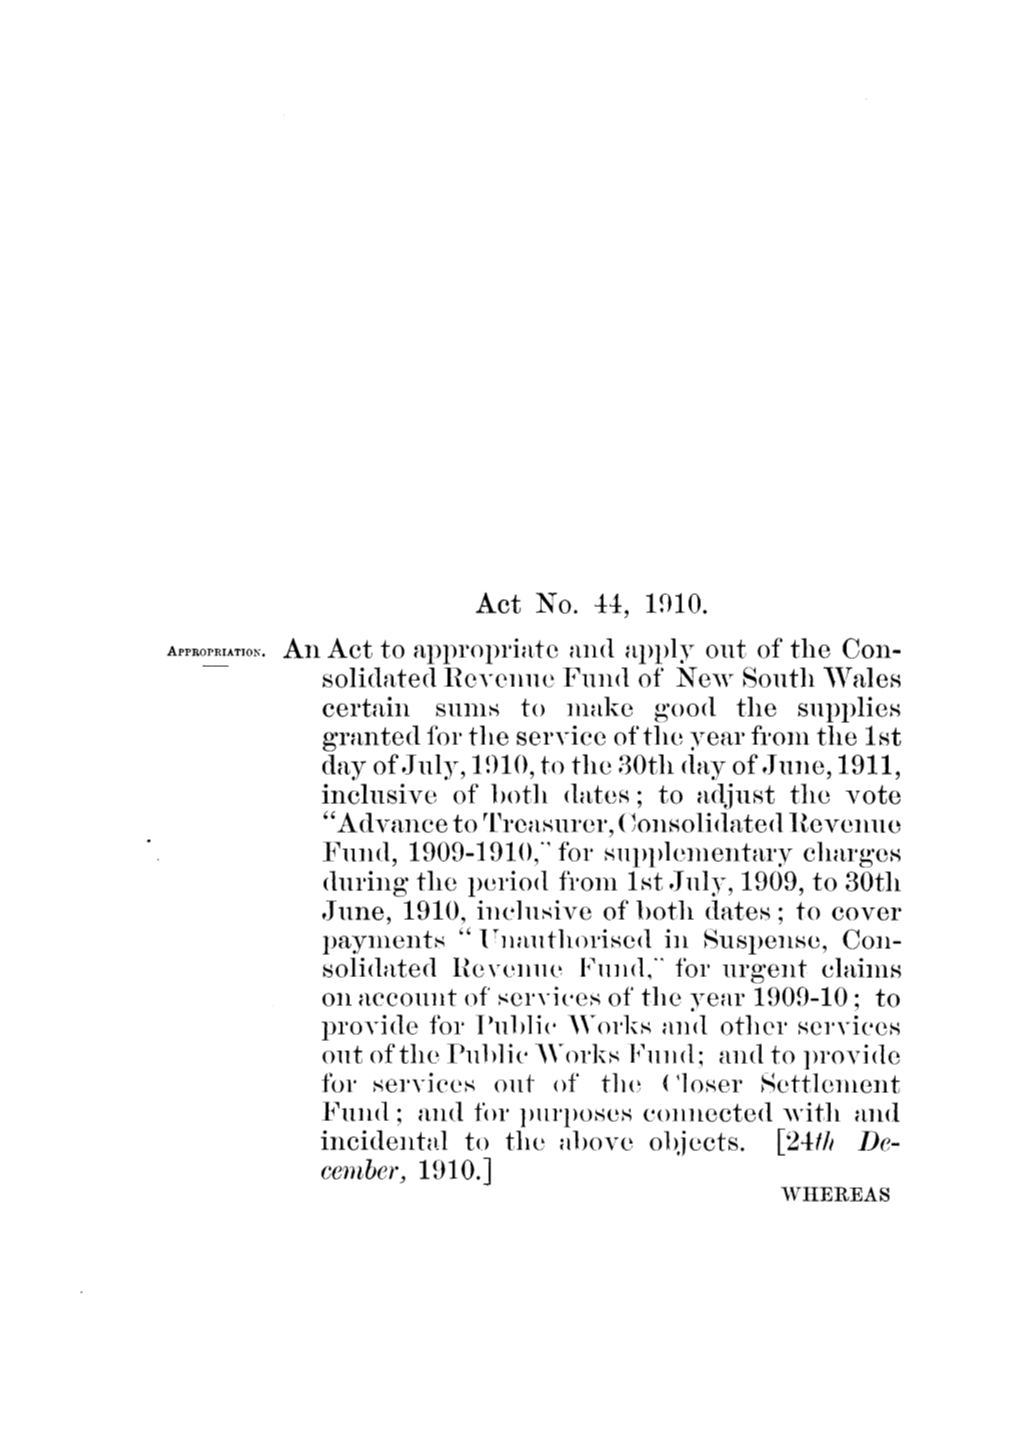 Act No. 44, 1910. an Act to Appropriate and Apply out of The